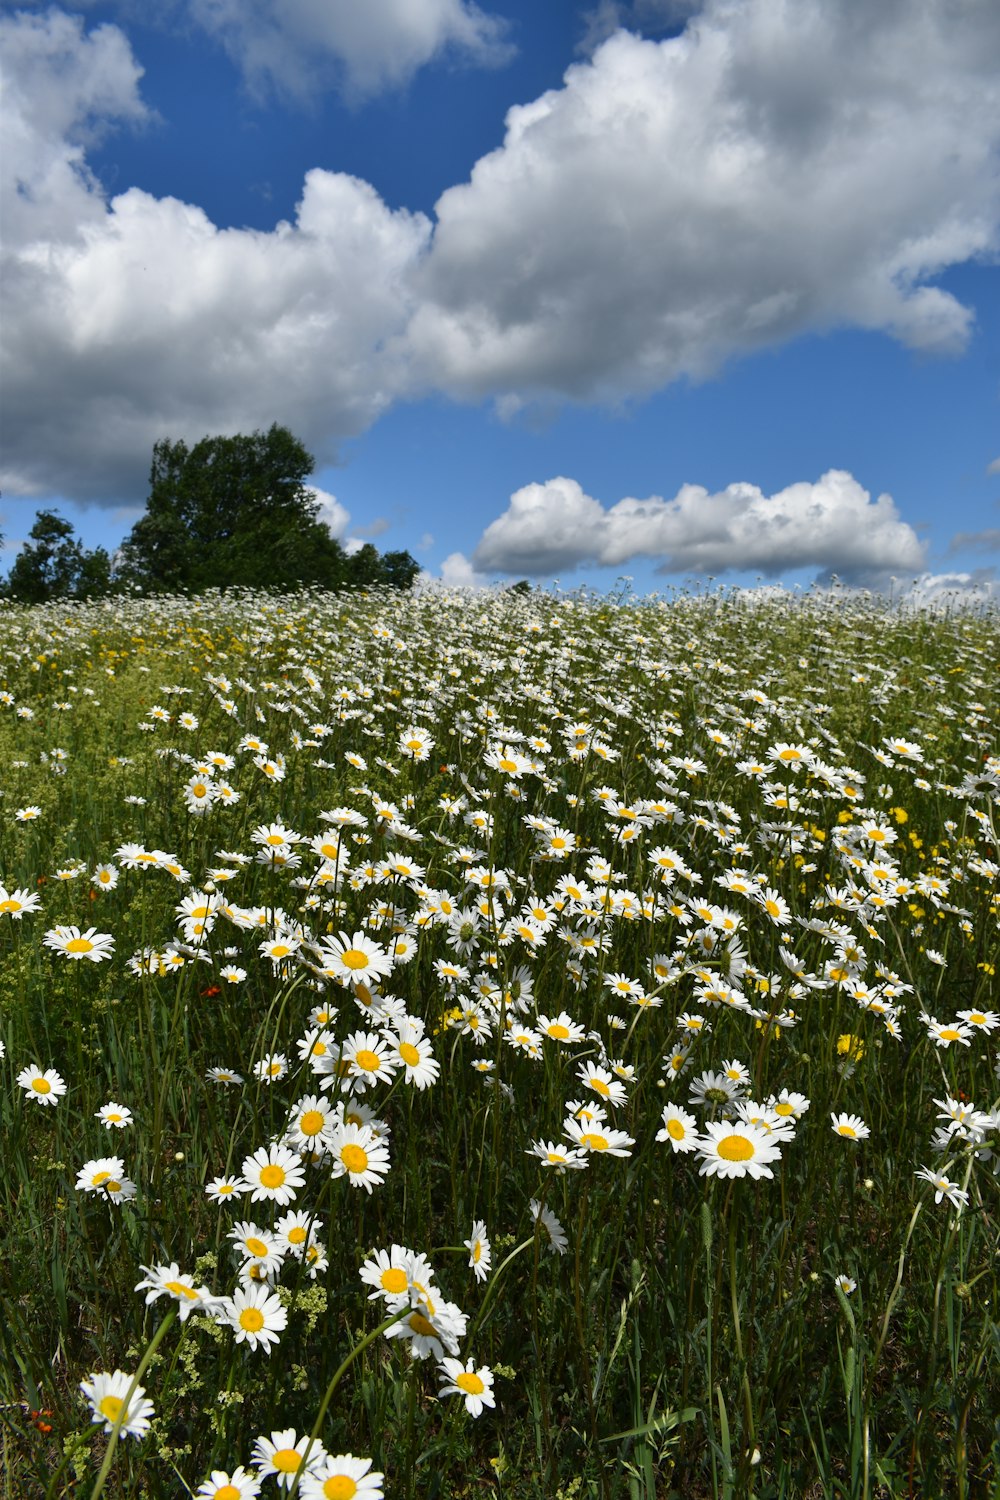 a field of daisies under a cloudy blue sky